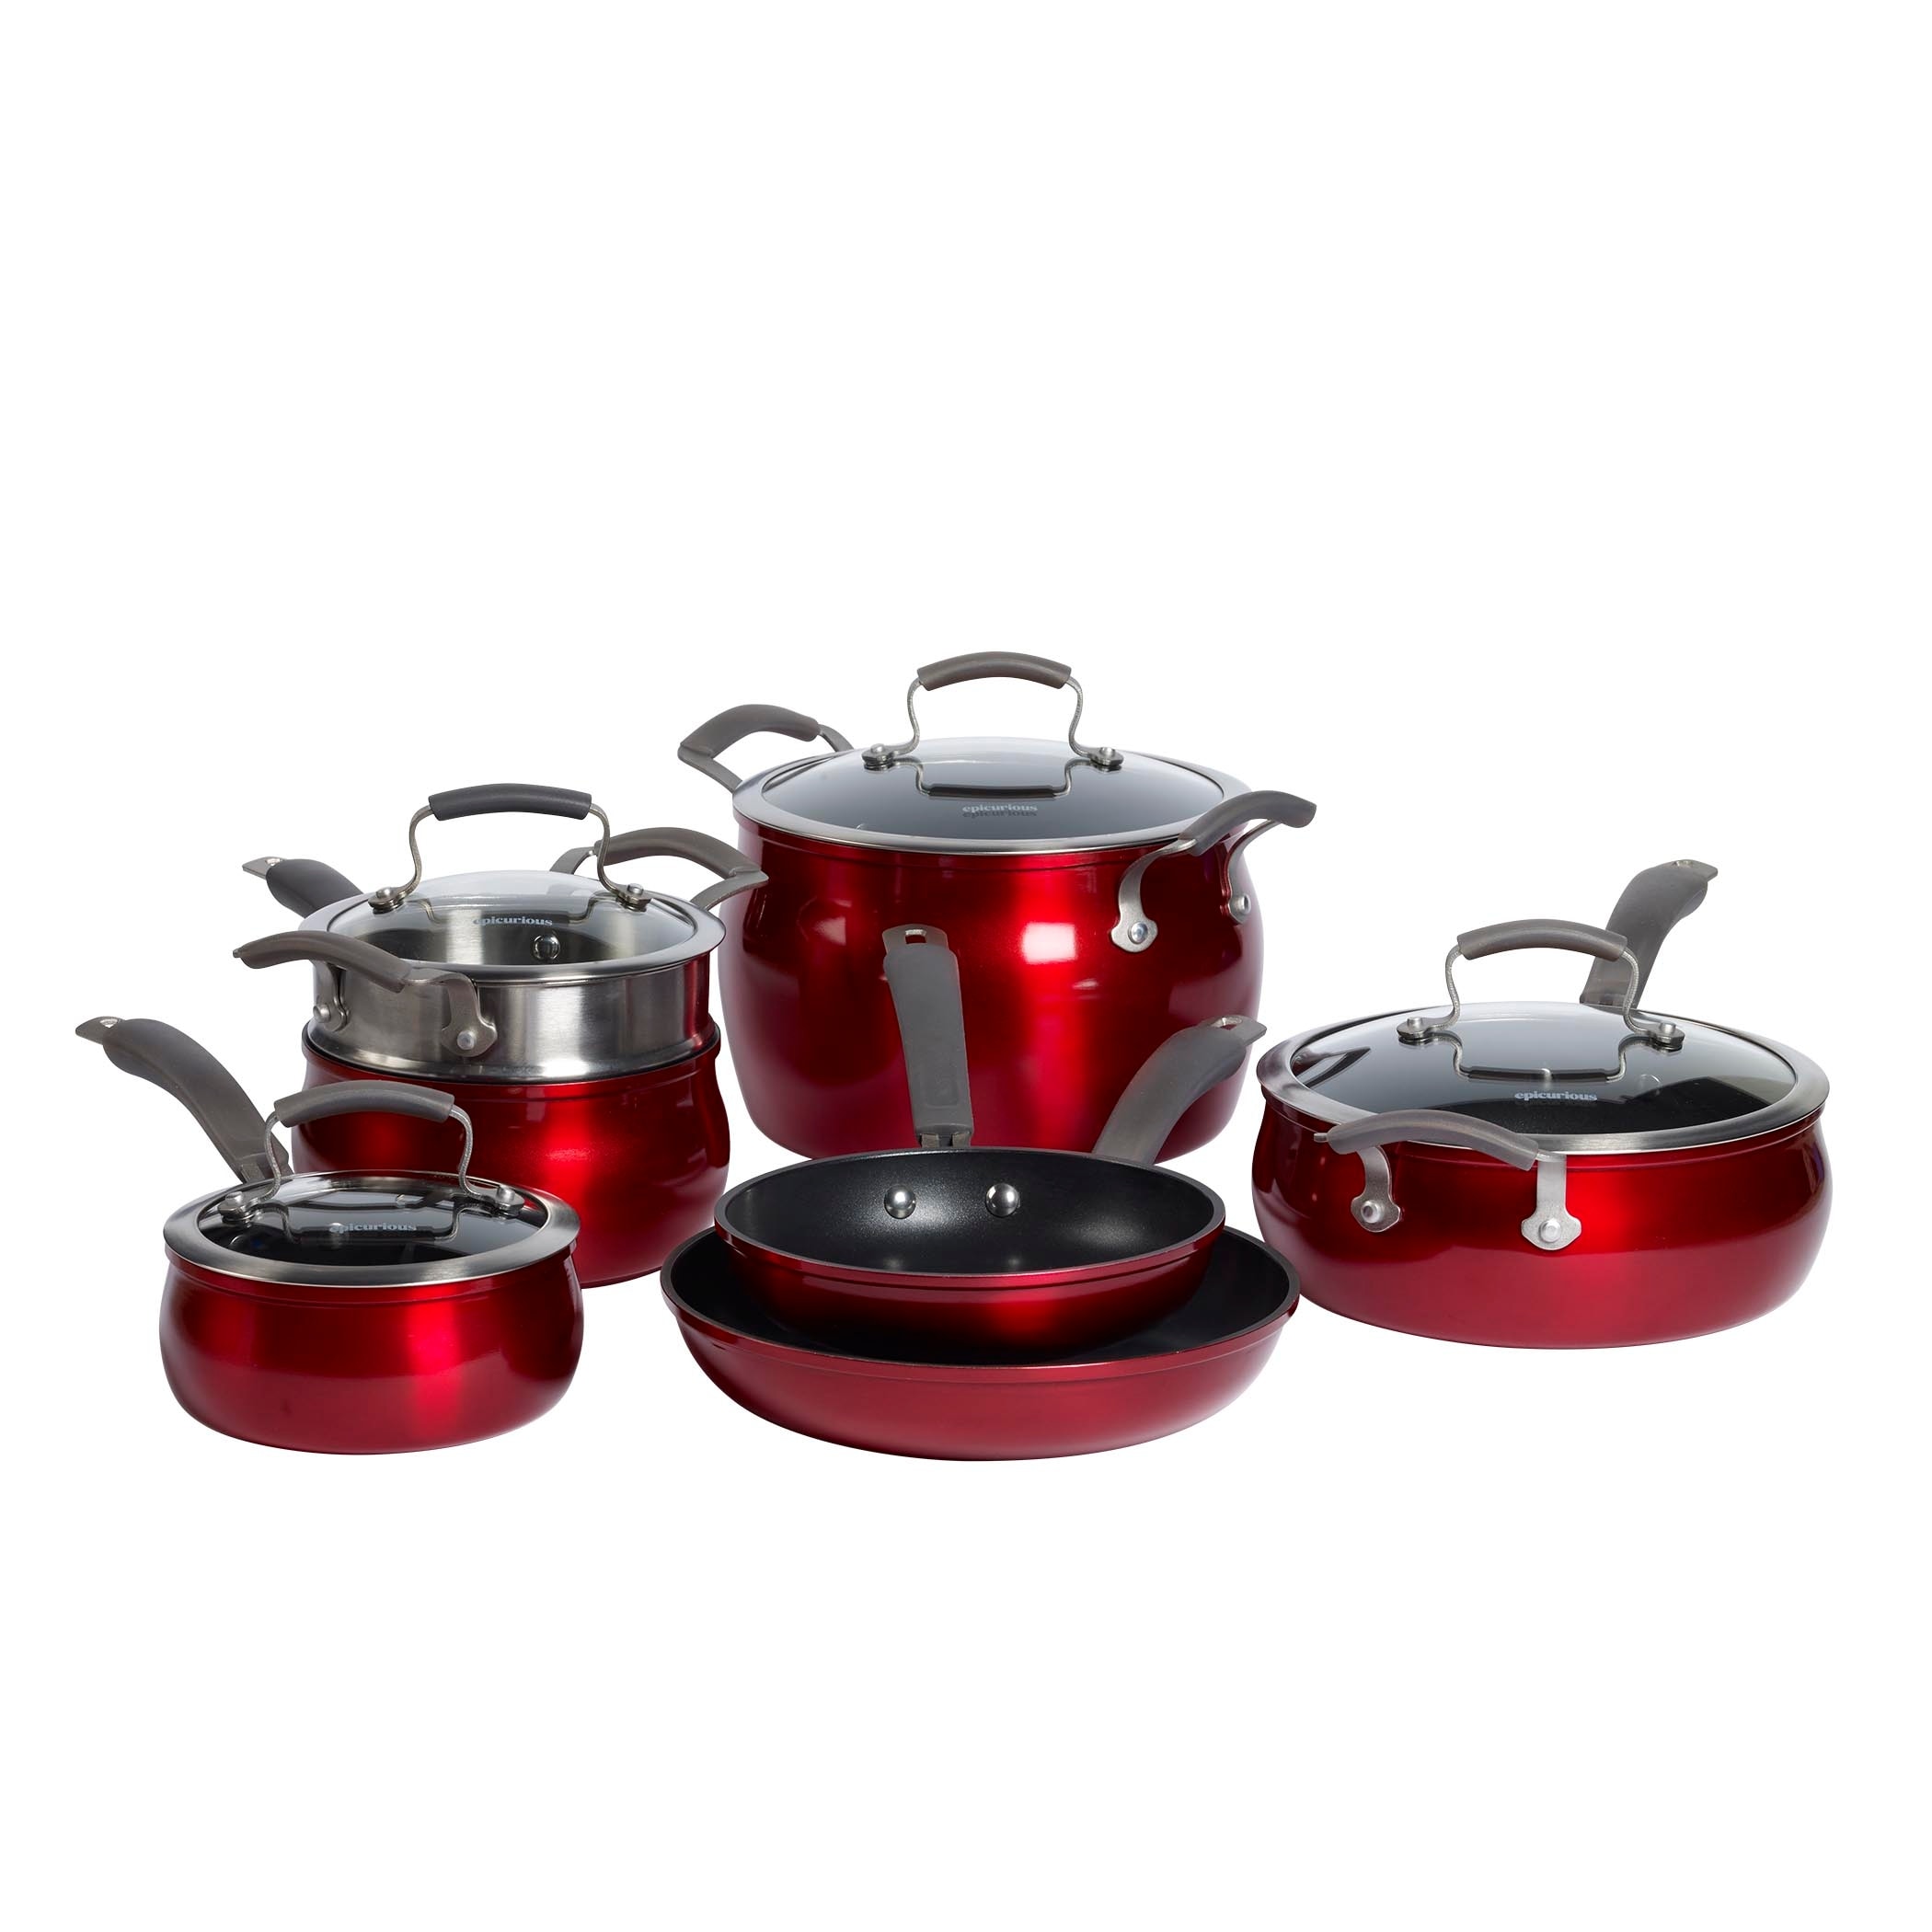 https://ak1.ostkcdn.com/images/products/is/images/direct/d5a9f3fd0bed02fb4002846bc610a81bb3982941/Epicurious-11Pc-Aluminum-Cookware-Set-Red.jpg